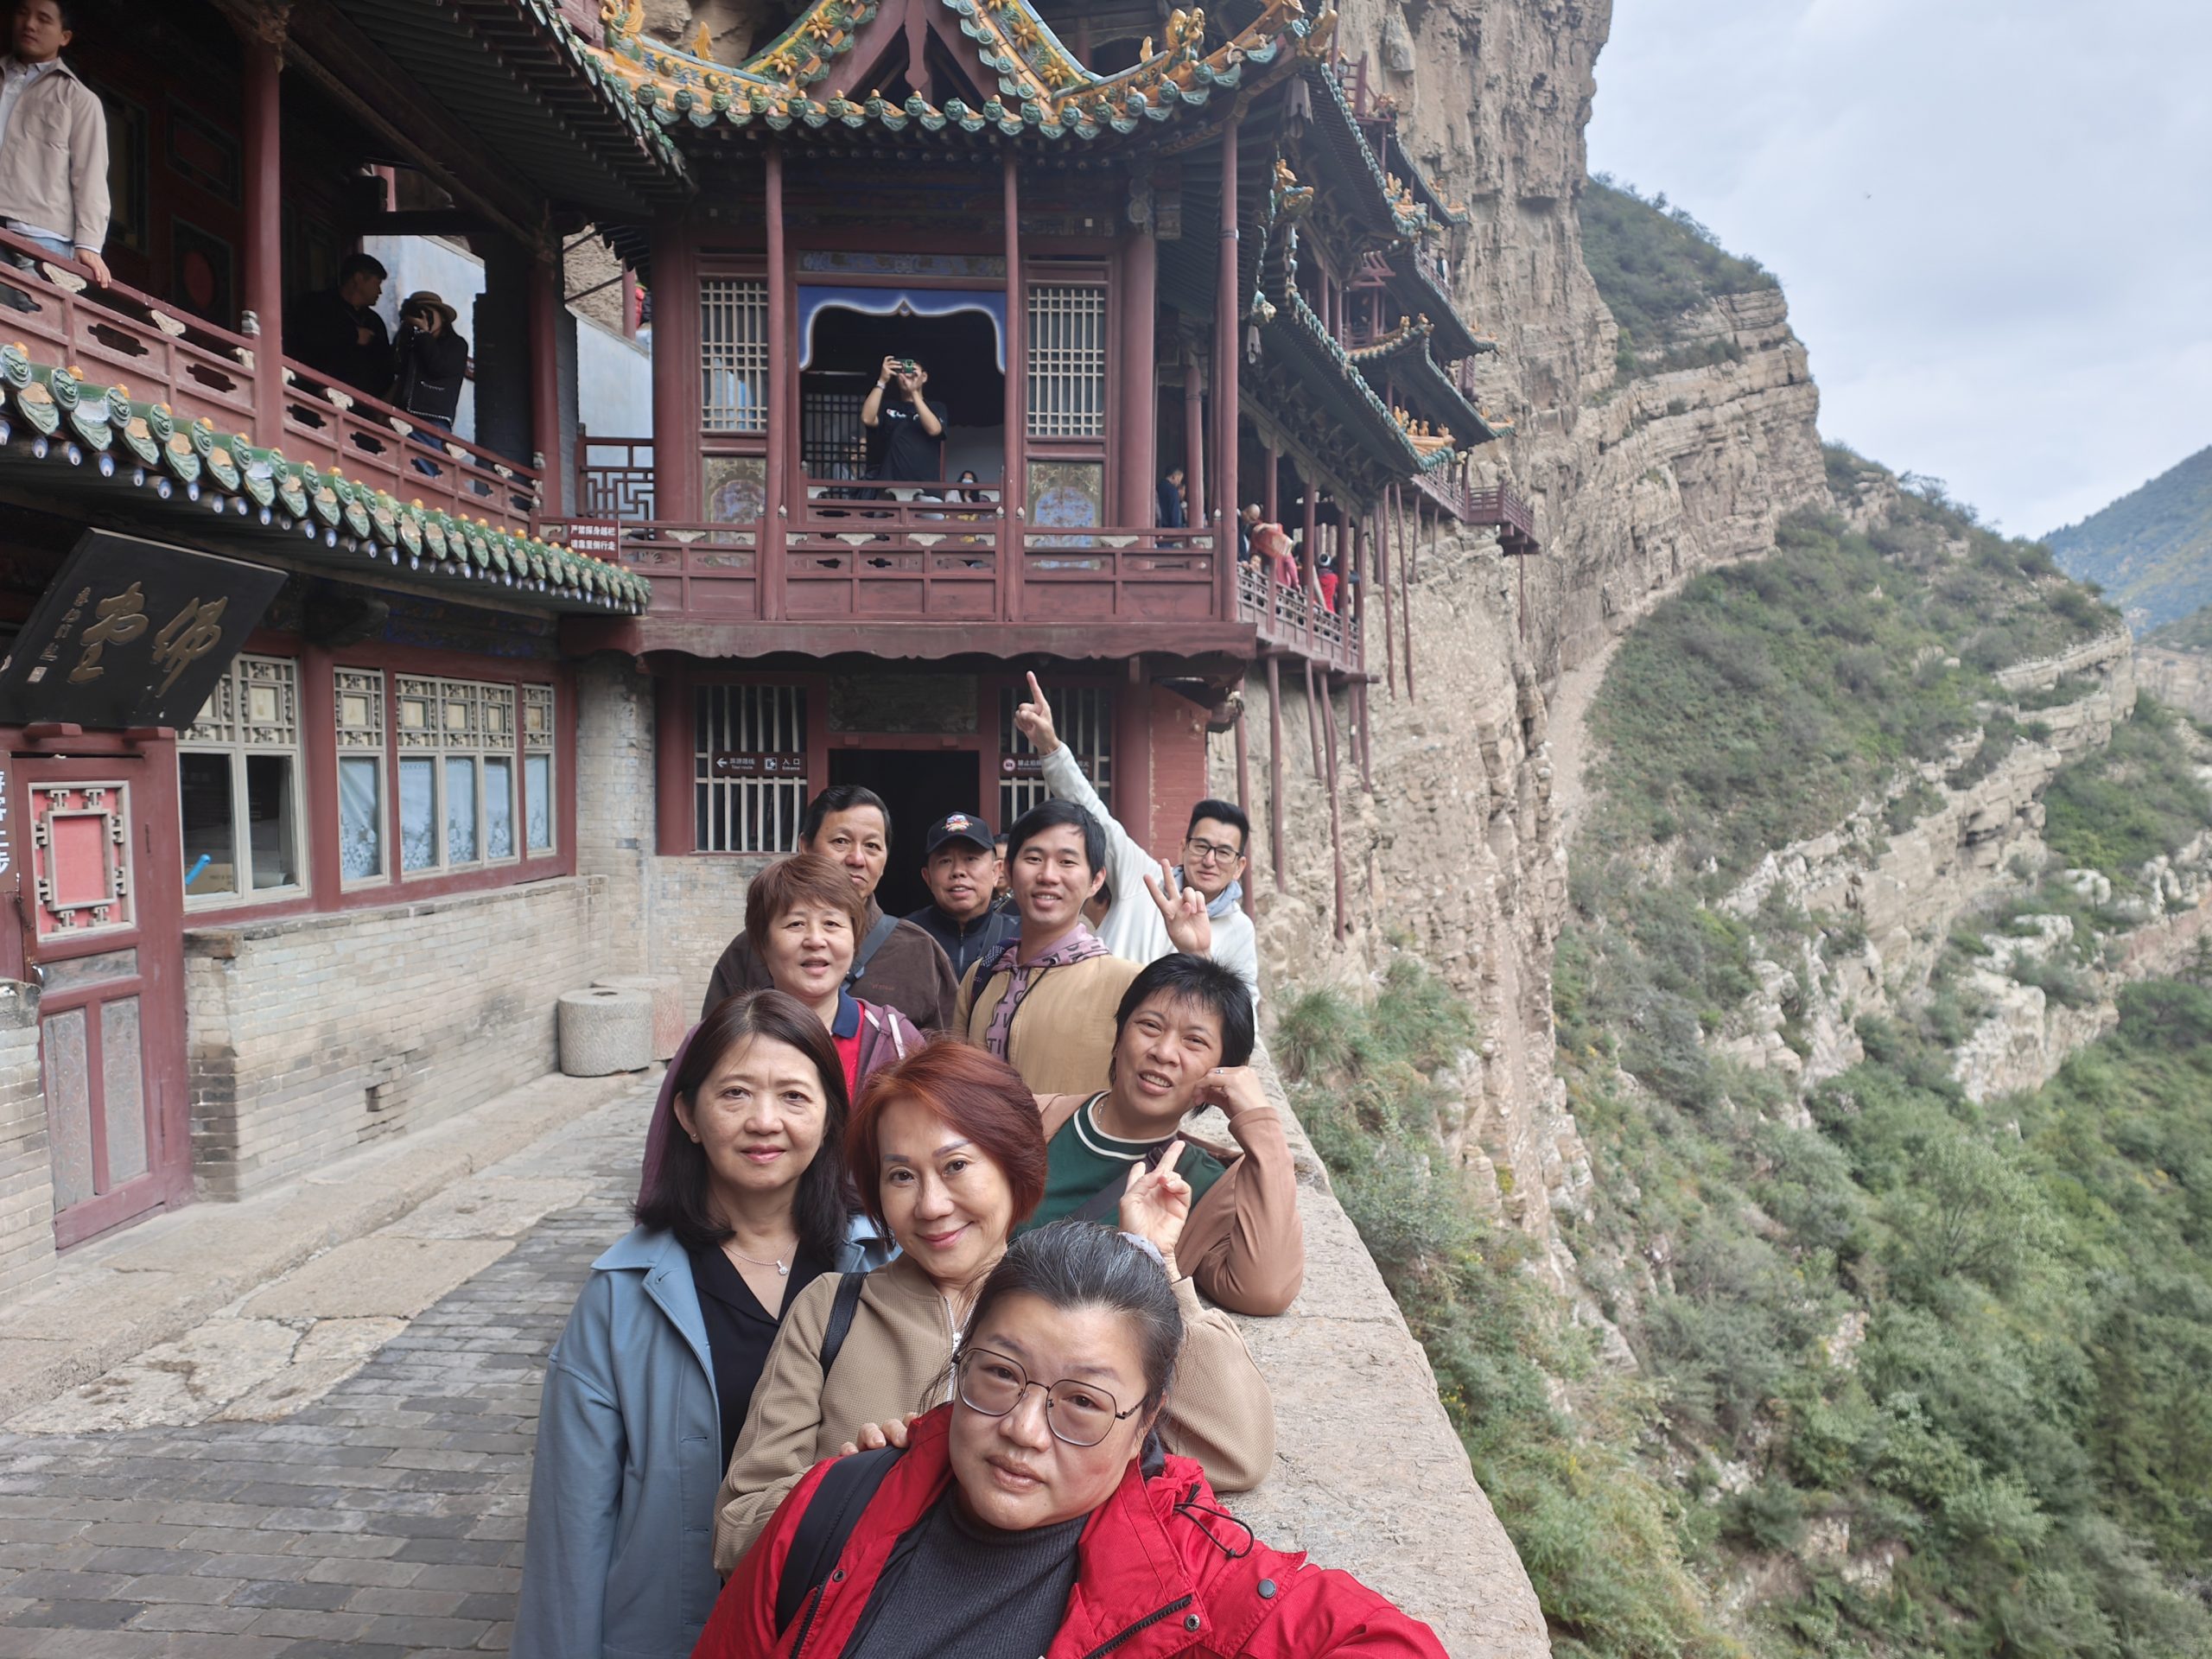 The leader of the second group, Mei Lin (front), led the group to the Hanging Temple, allowing the group members to experience first-hand the architectural talents of the ancients.